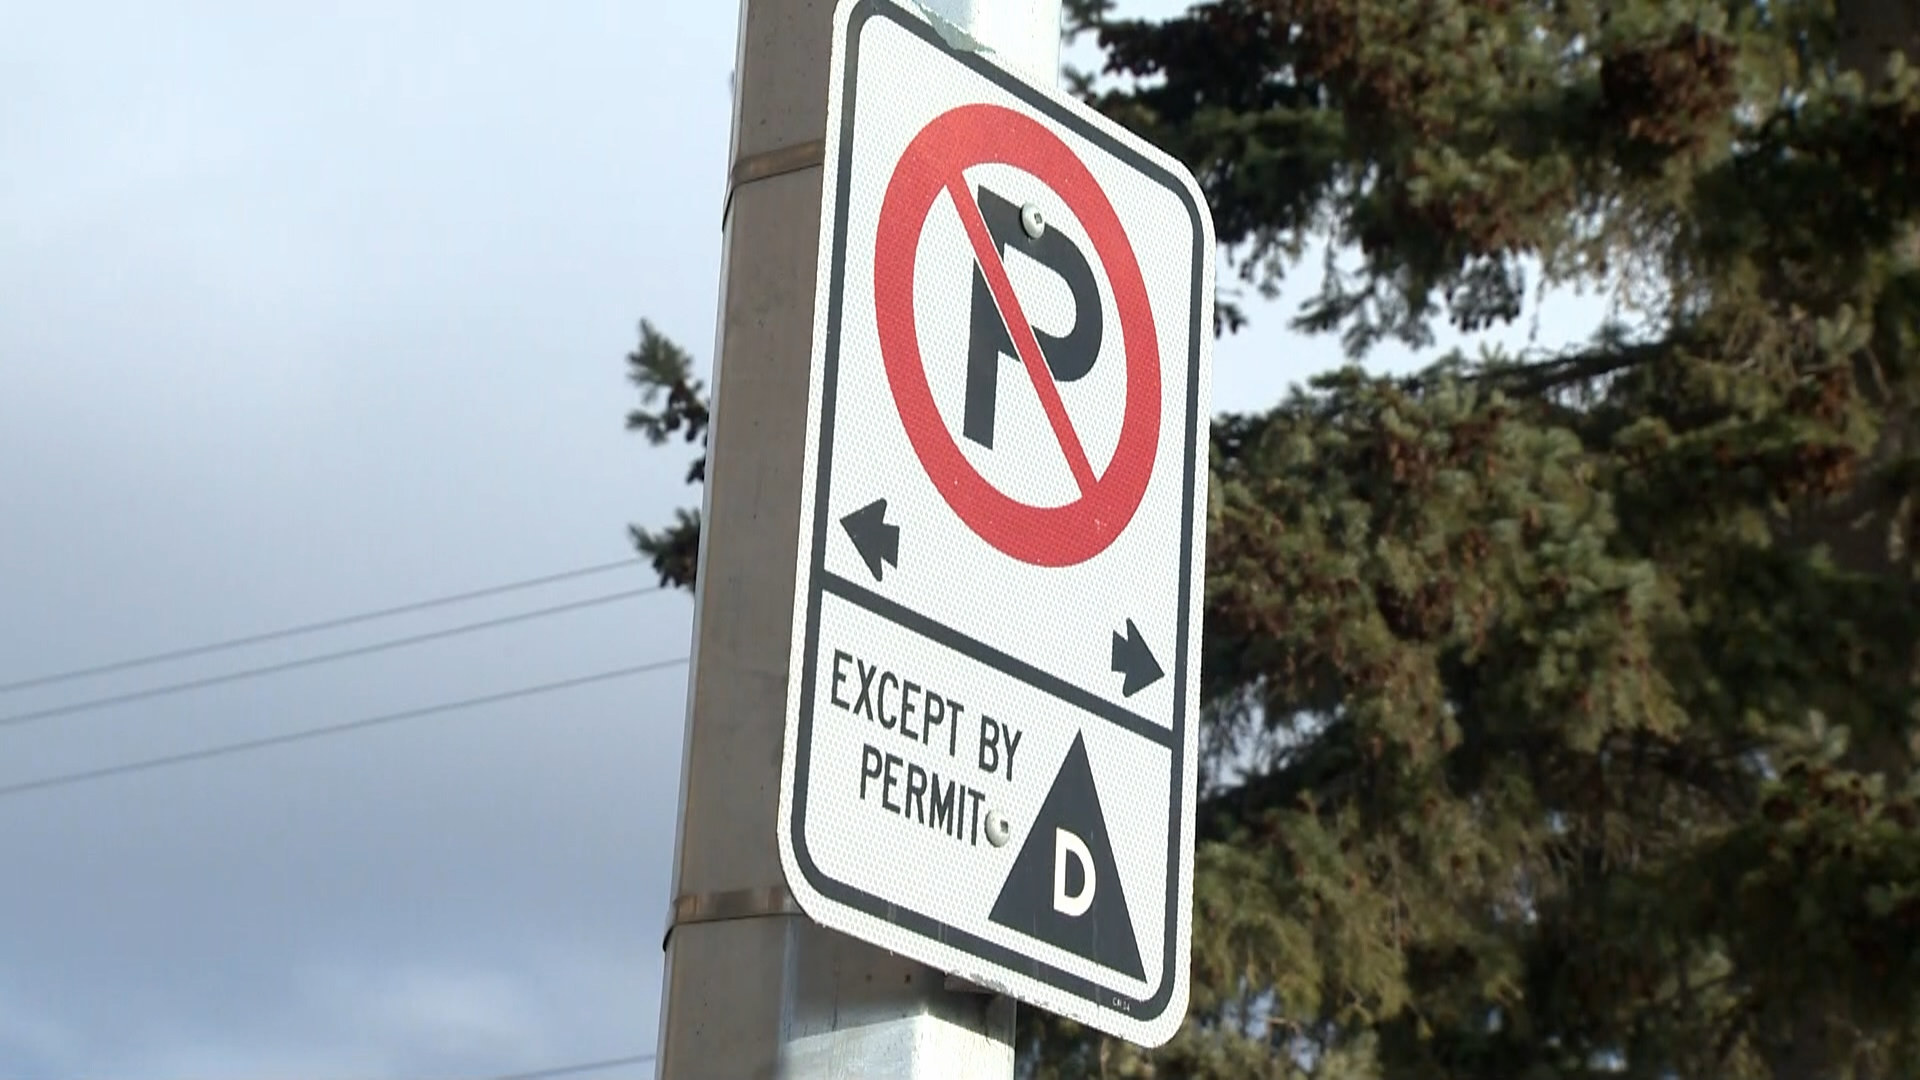 Calgary city council to consider revised residential parking program fees